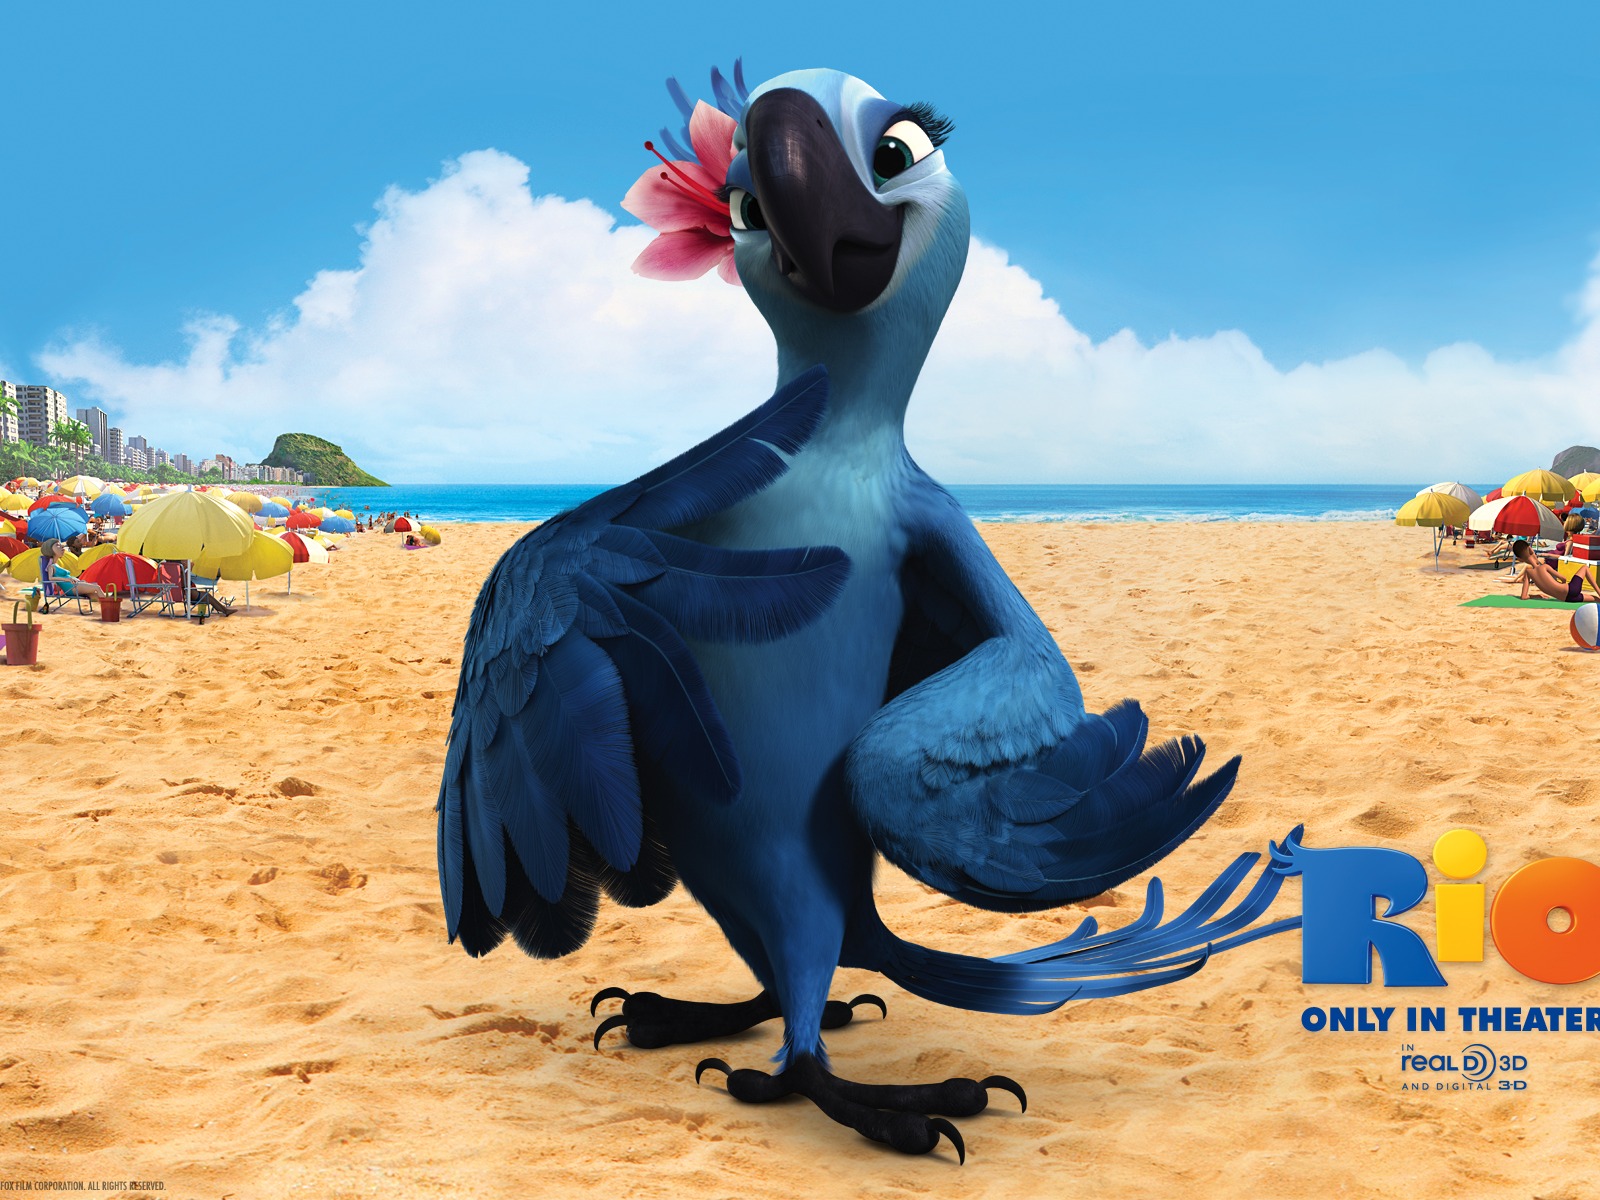 Rio 2011 wallpapers #5 - 1600x1200